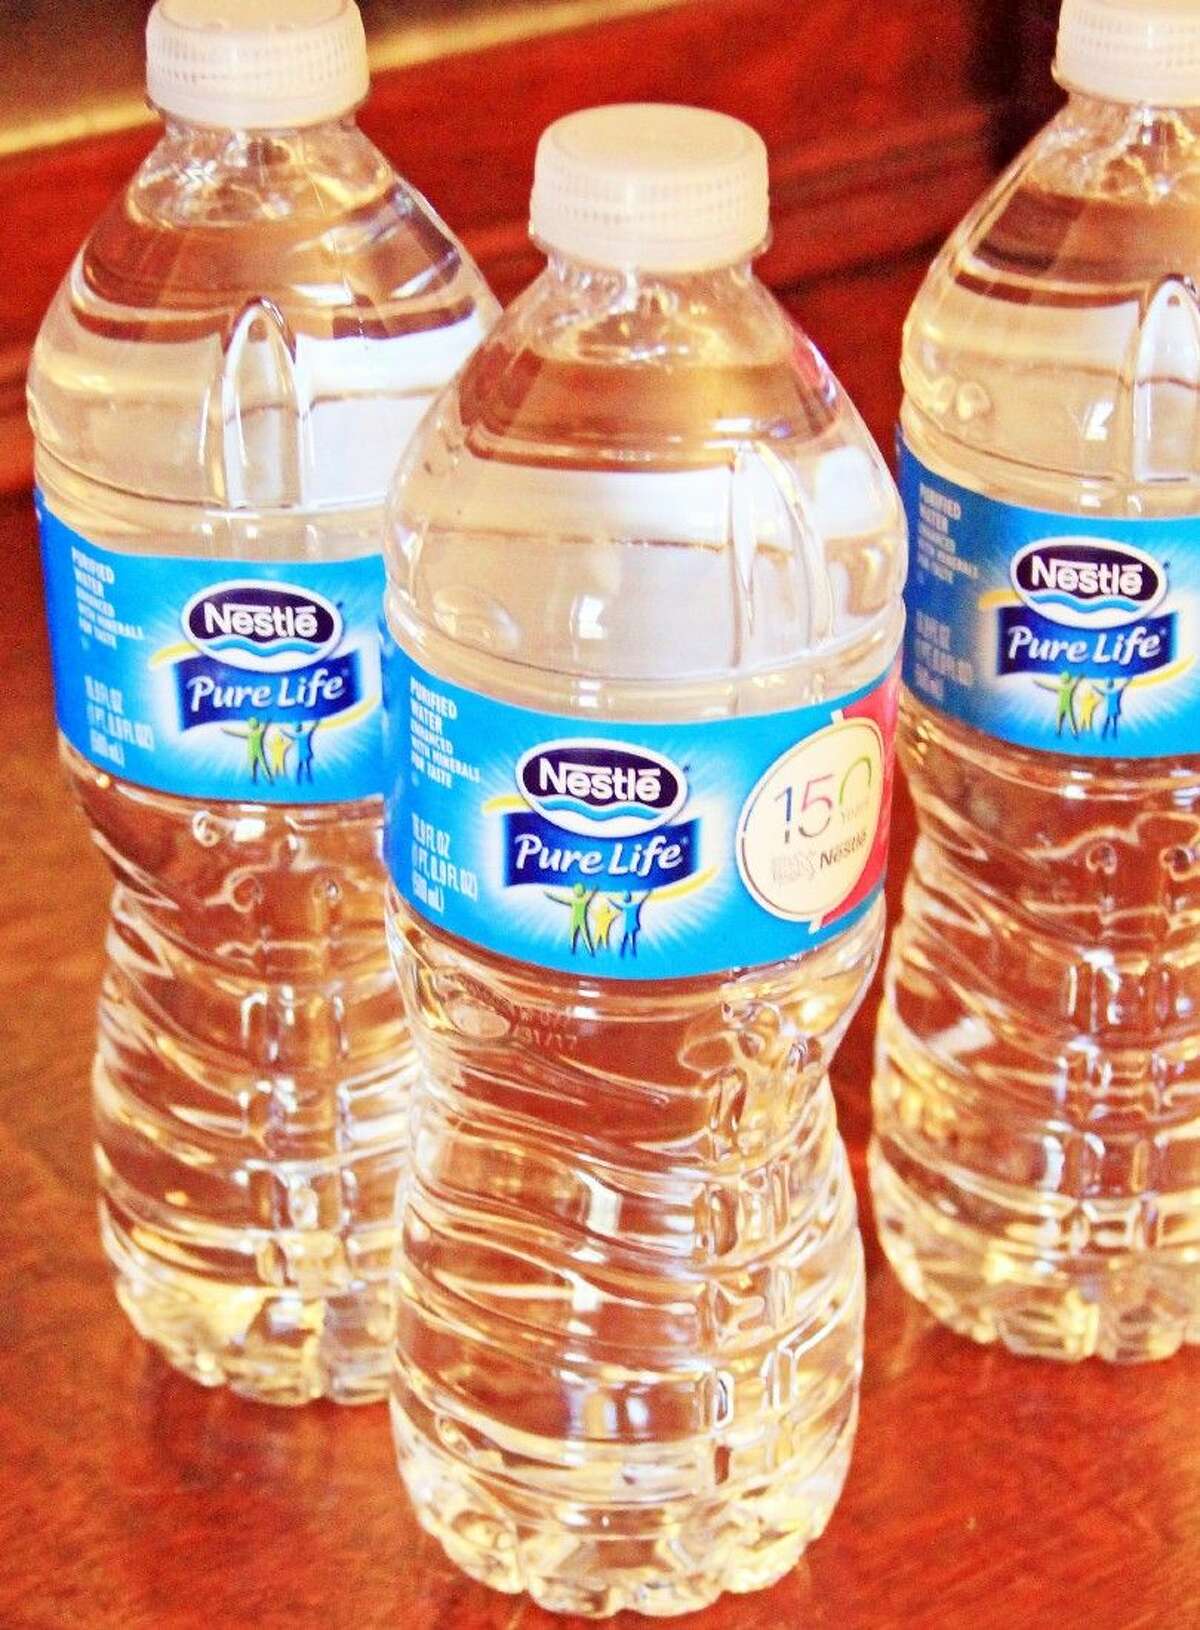 Nestlé Waters North America Inc., the nation’s largest bottled water, operates a 312,000 square-foot plant in Pasadena that produces approximately 85,000 bottles an hour.